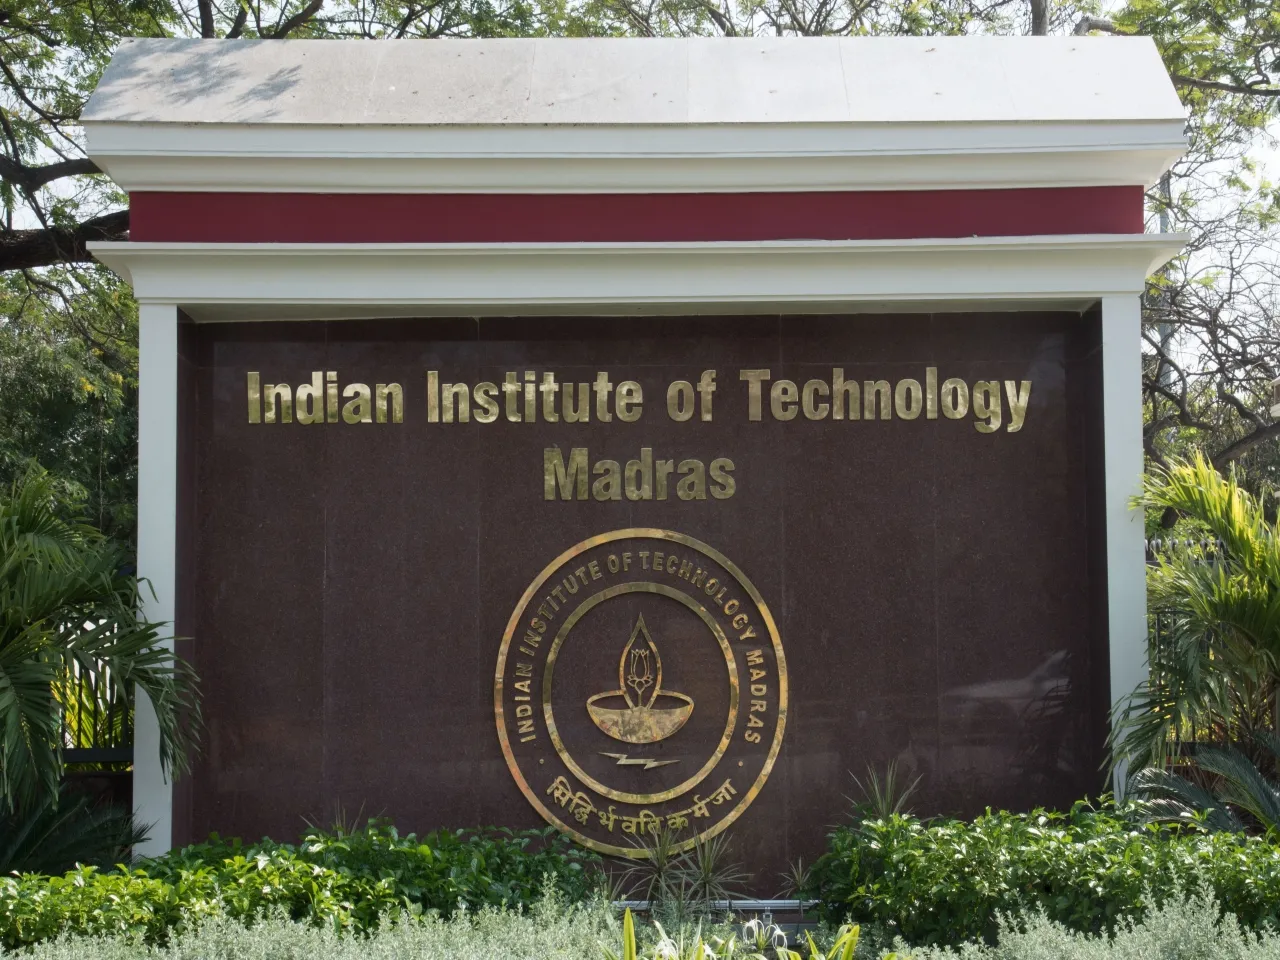 IIT Madras researchers highlight CO2 emissions due to buildings over next two decades